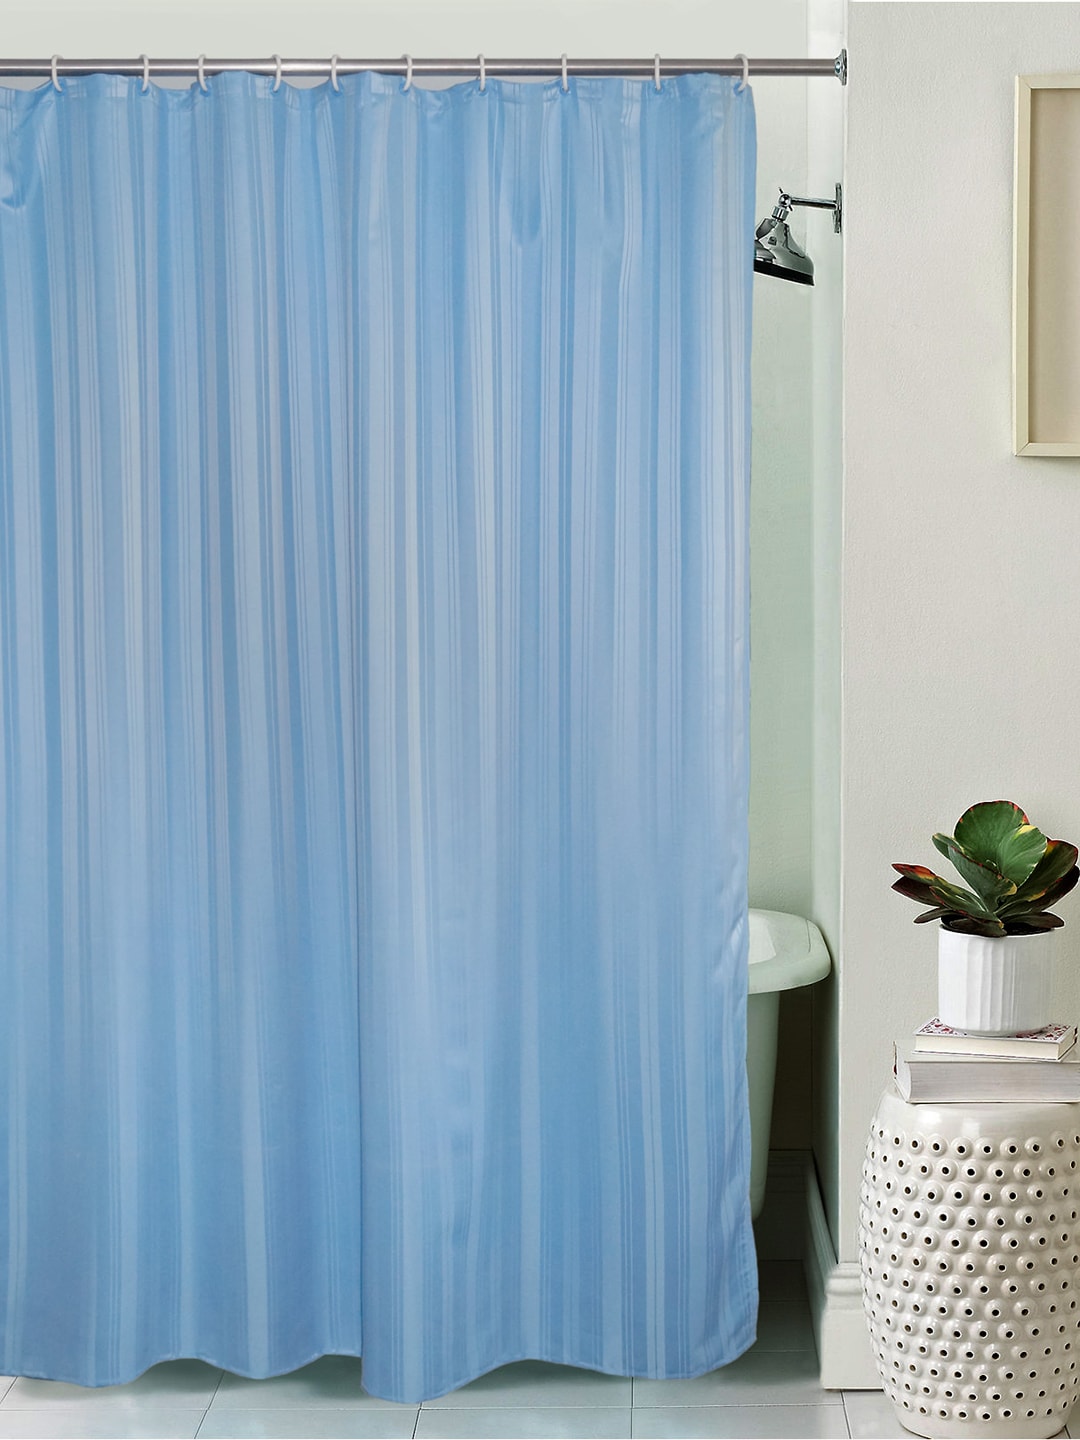 Lushomes Unidyed Blue Polyester Shower Curtain with 12 Plastic Eyelets Price in India